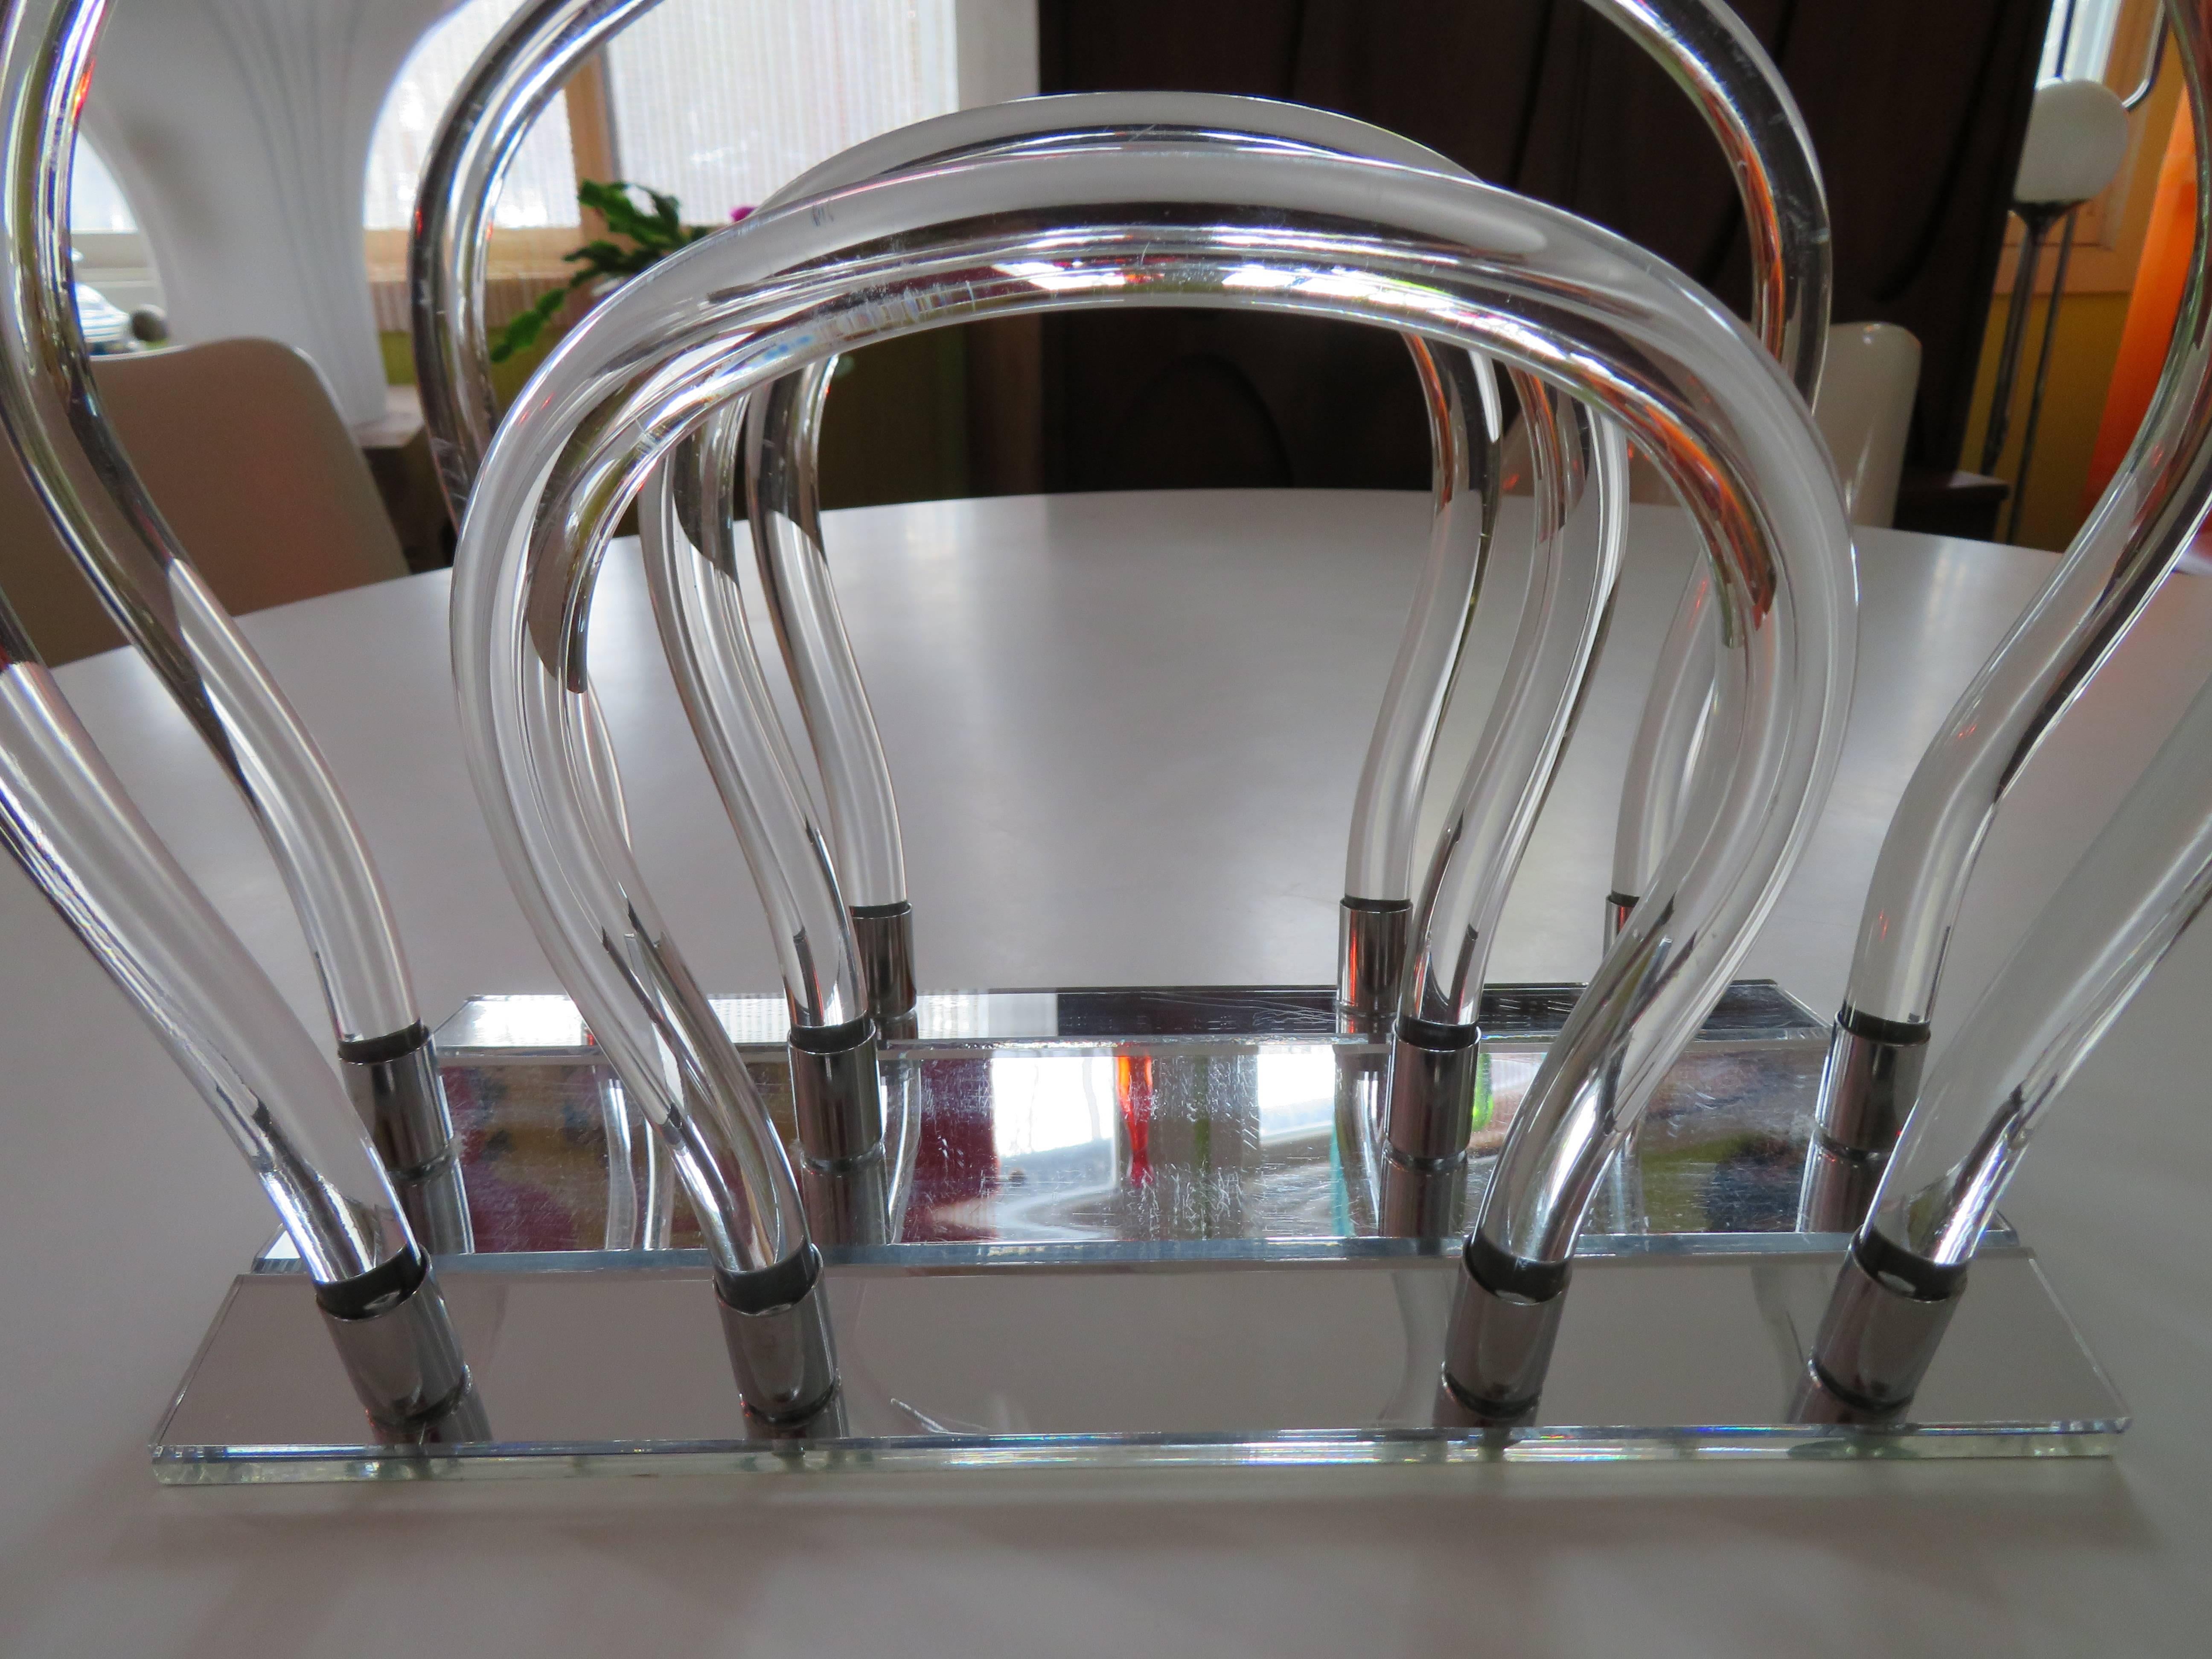 Lucite, chrome and mirror sculptural magazine rack featuring mirrored base that holds twelve chrome sockets into which the Lucite uprights are secured.